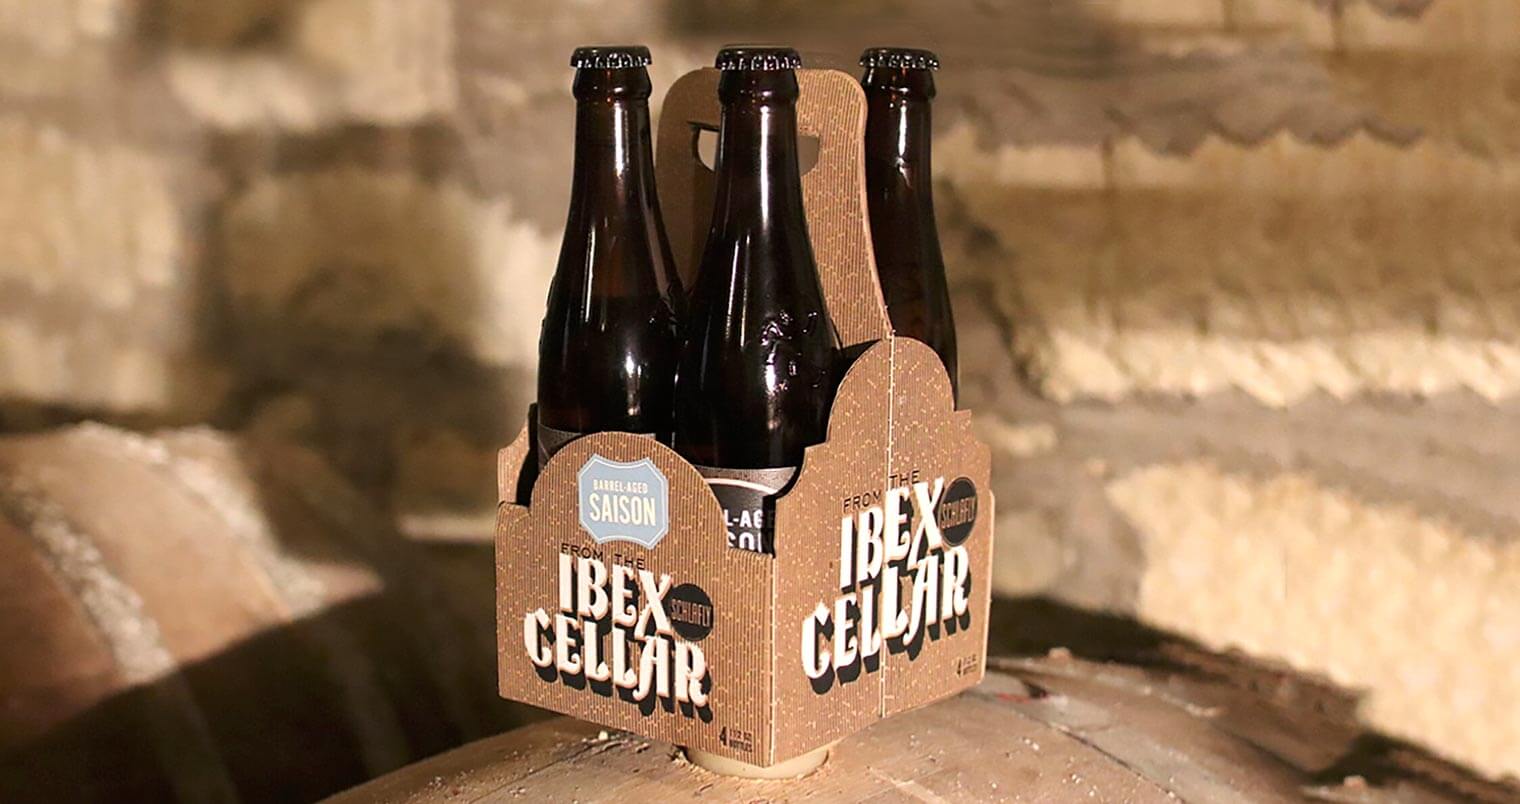 Schlafly Beer Releases Barrel-Aged Saison, featured image